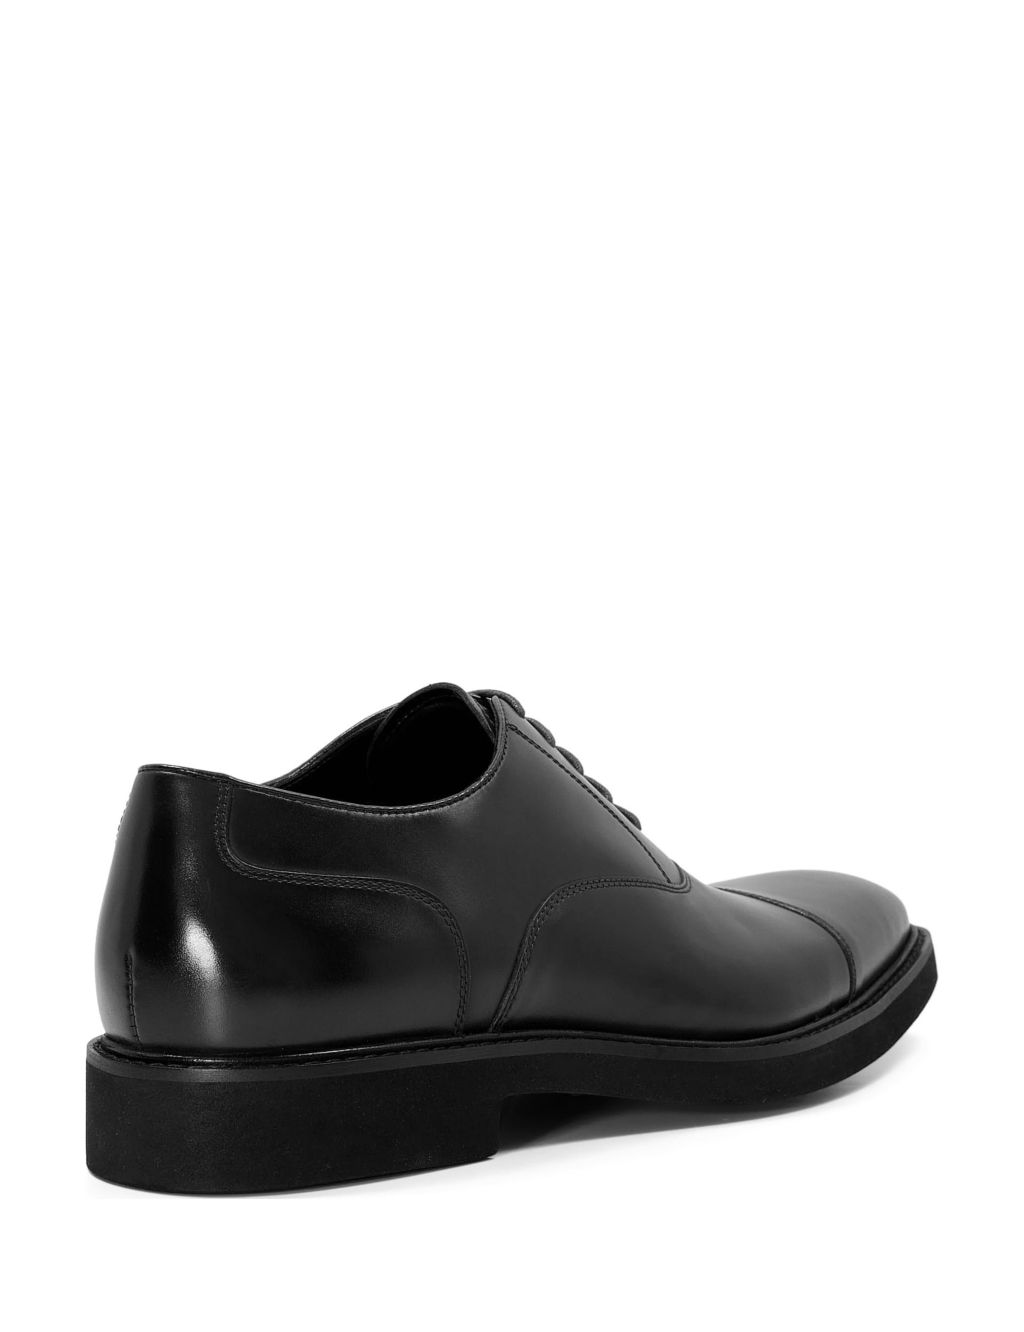 Leather Oxford Shoes image 4